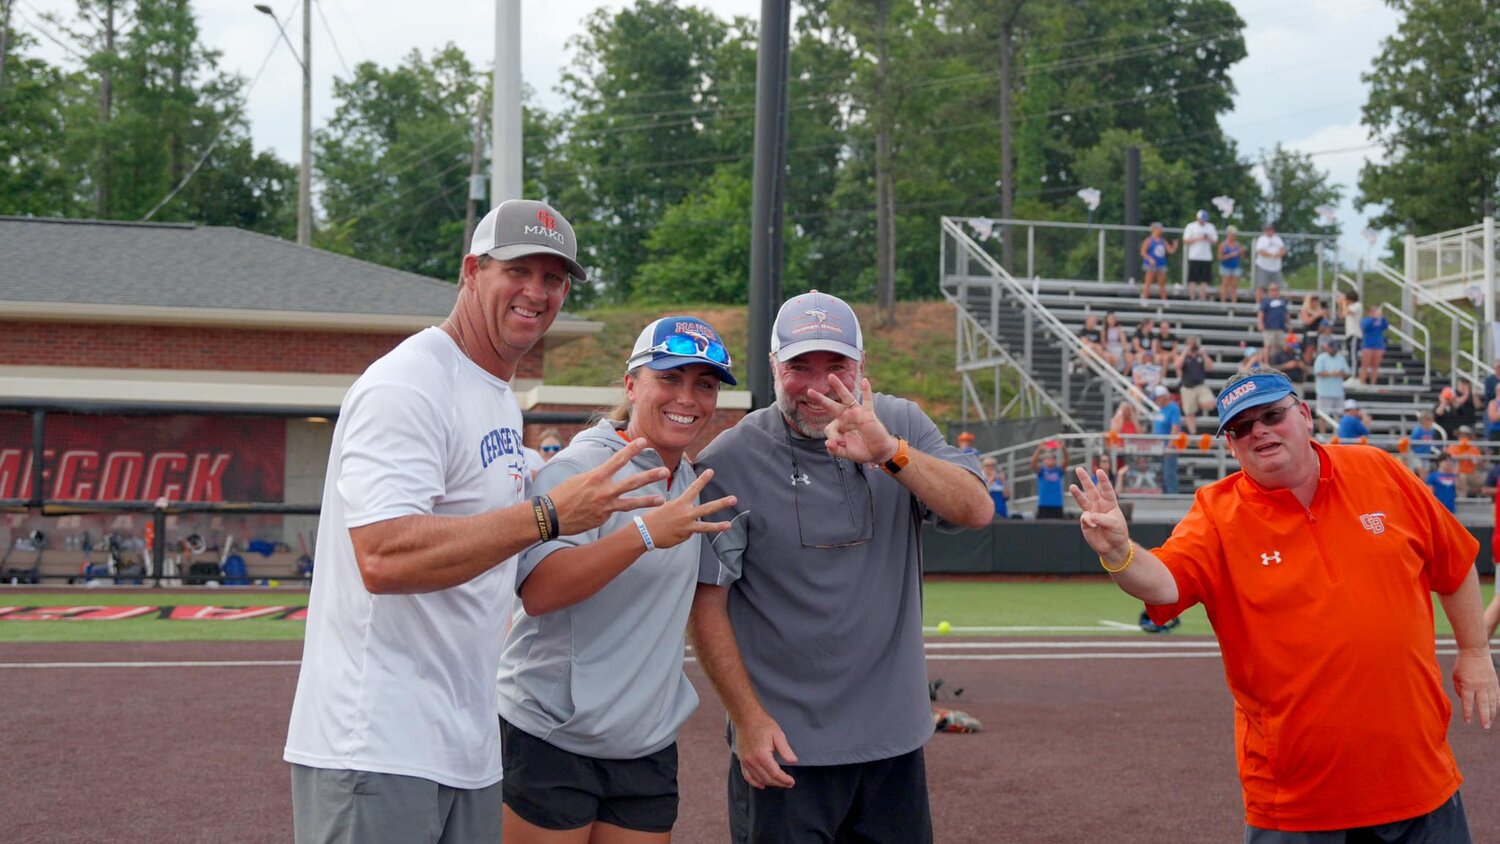 The Orange Beach Mako softball coaching staff celebrates a third consecutive state championship Saturday afternoon in Jacksonville after a 5-0 win over Houston Academy in the Class 4A finals. Orange Beach finished its first 4A state tournament undefeated with run-rule wins over White Plains and Prattville Christian and two wins over the Raiders from Houston Academy.